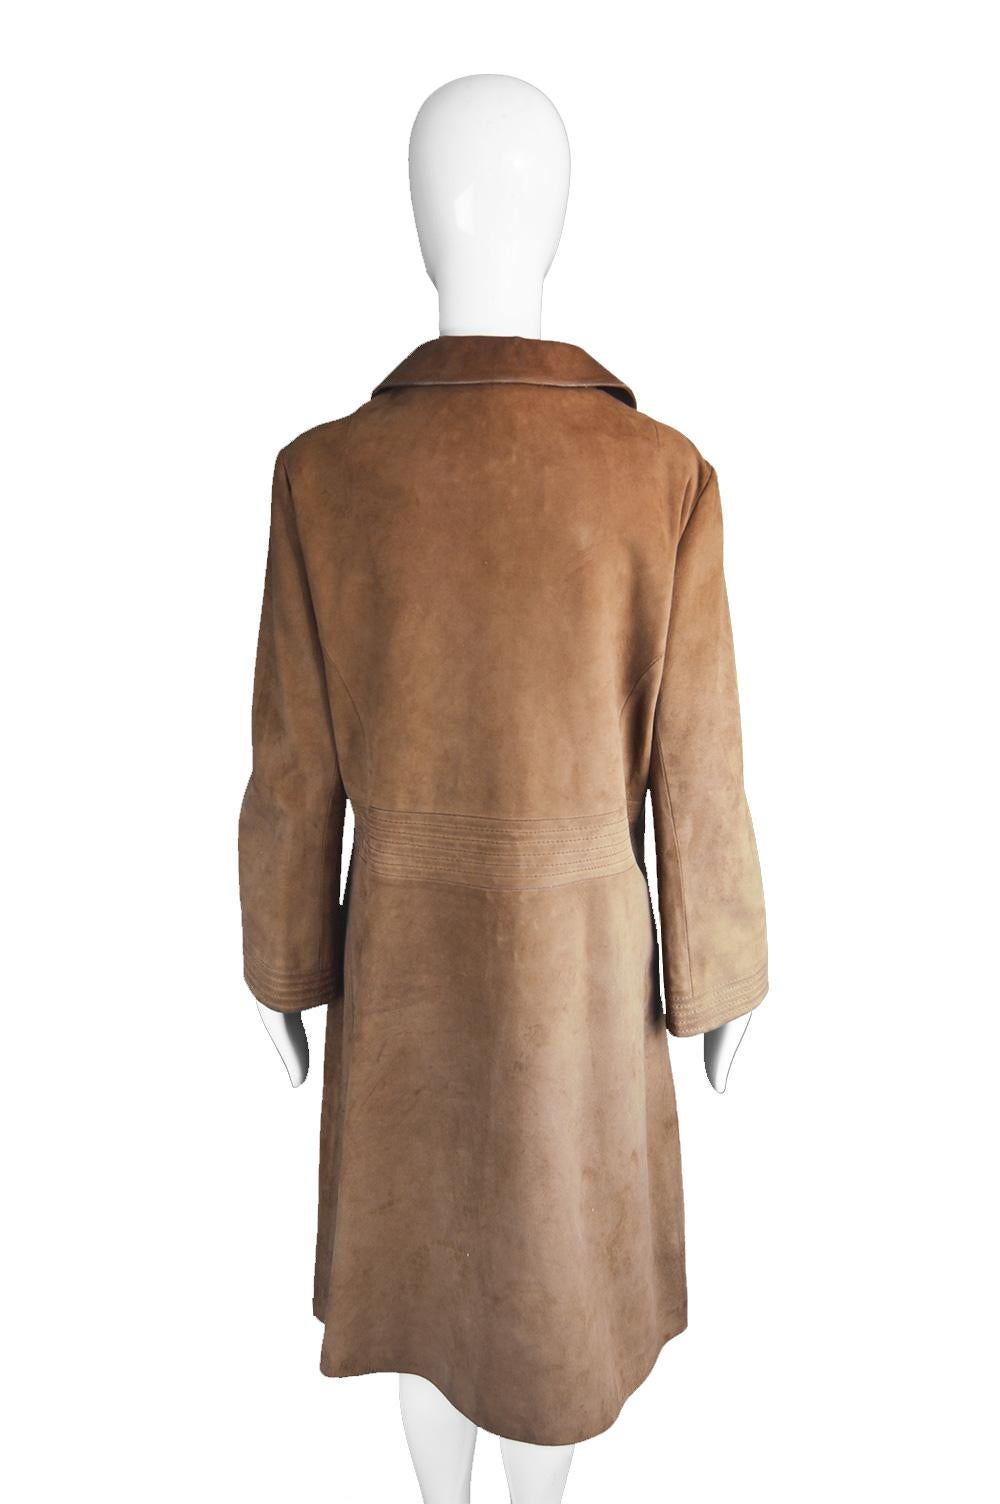 Women's Loewe Rare Vintage 1960s Brown Suede Leather Double Breasted Coat